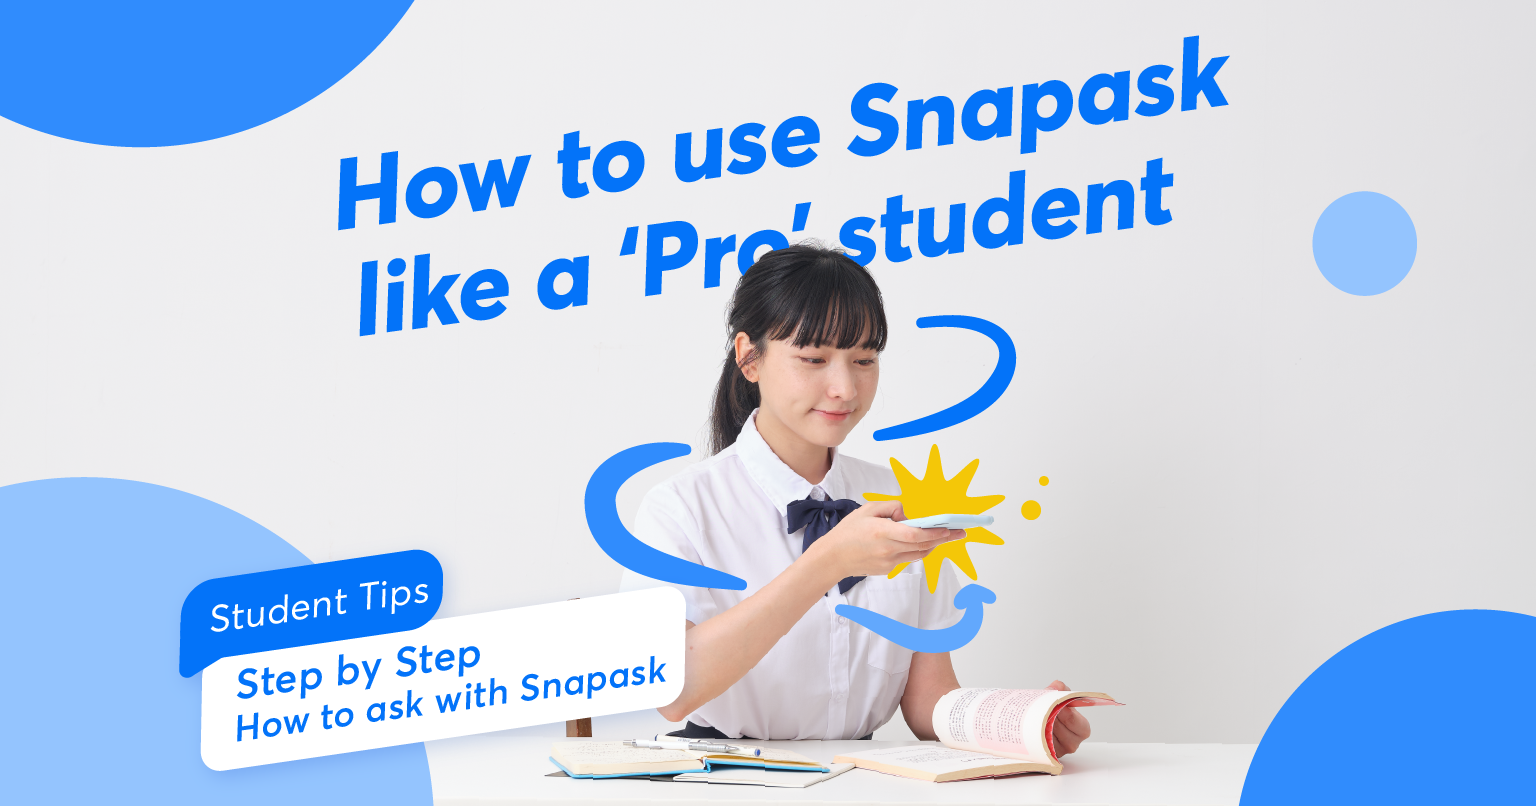 How to use Snapask like a pro student